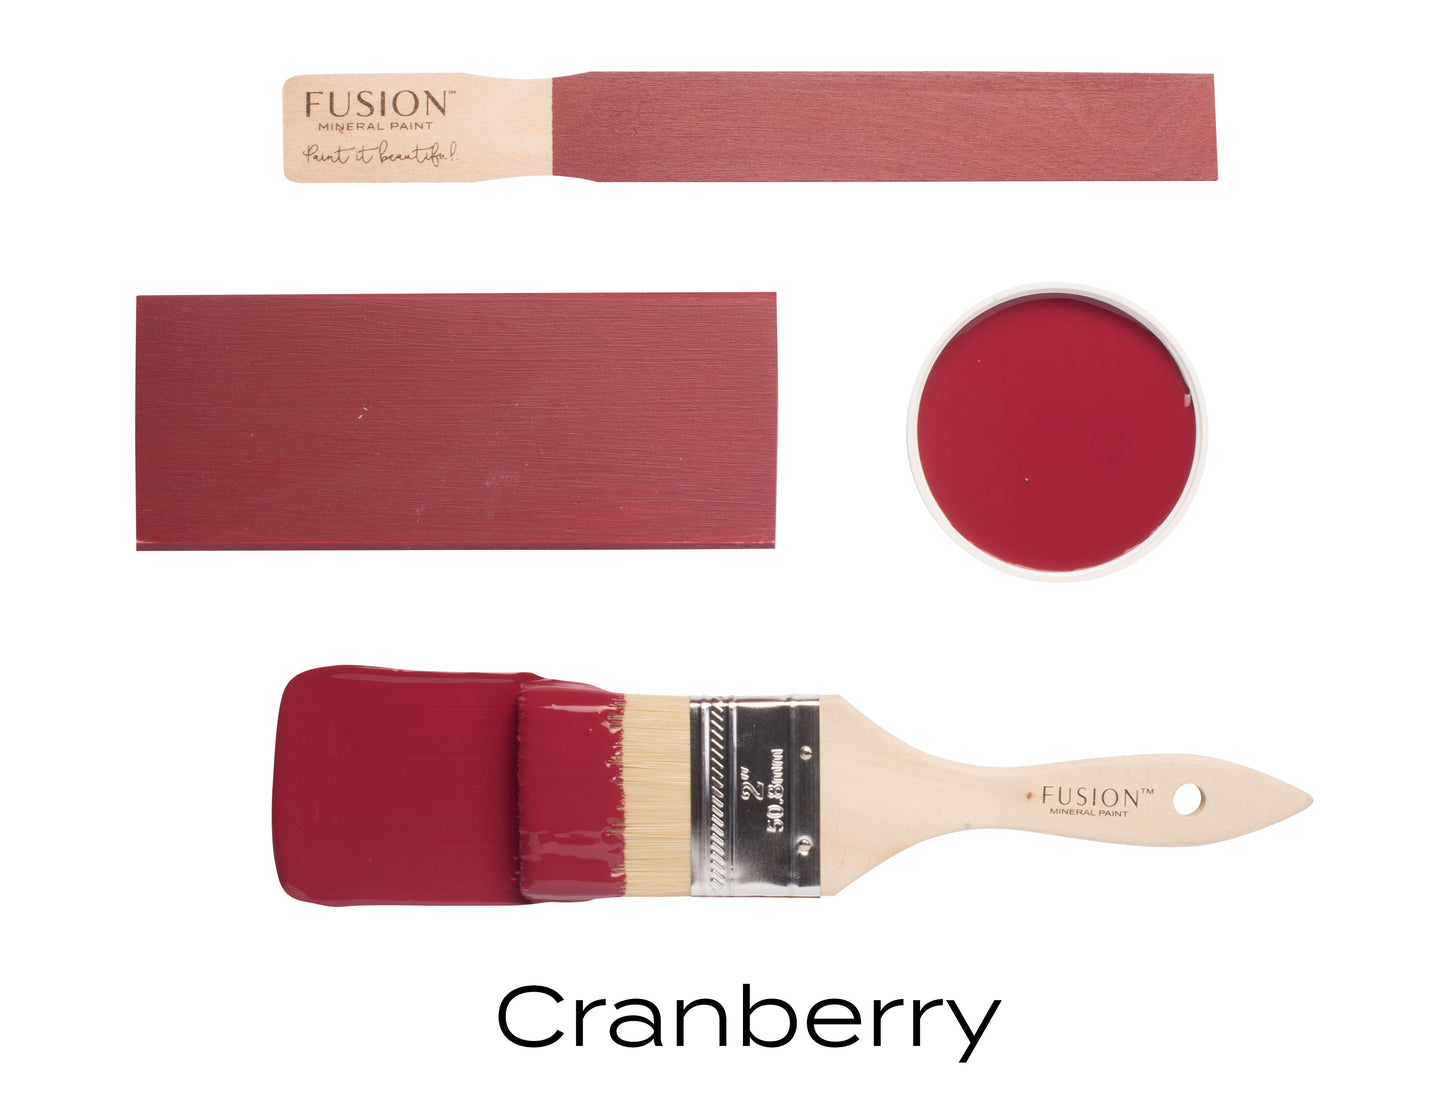 Cranberry by Fusion